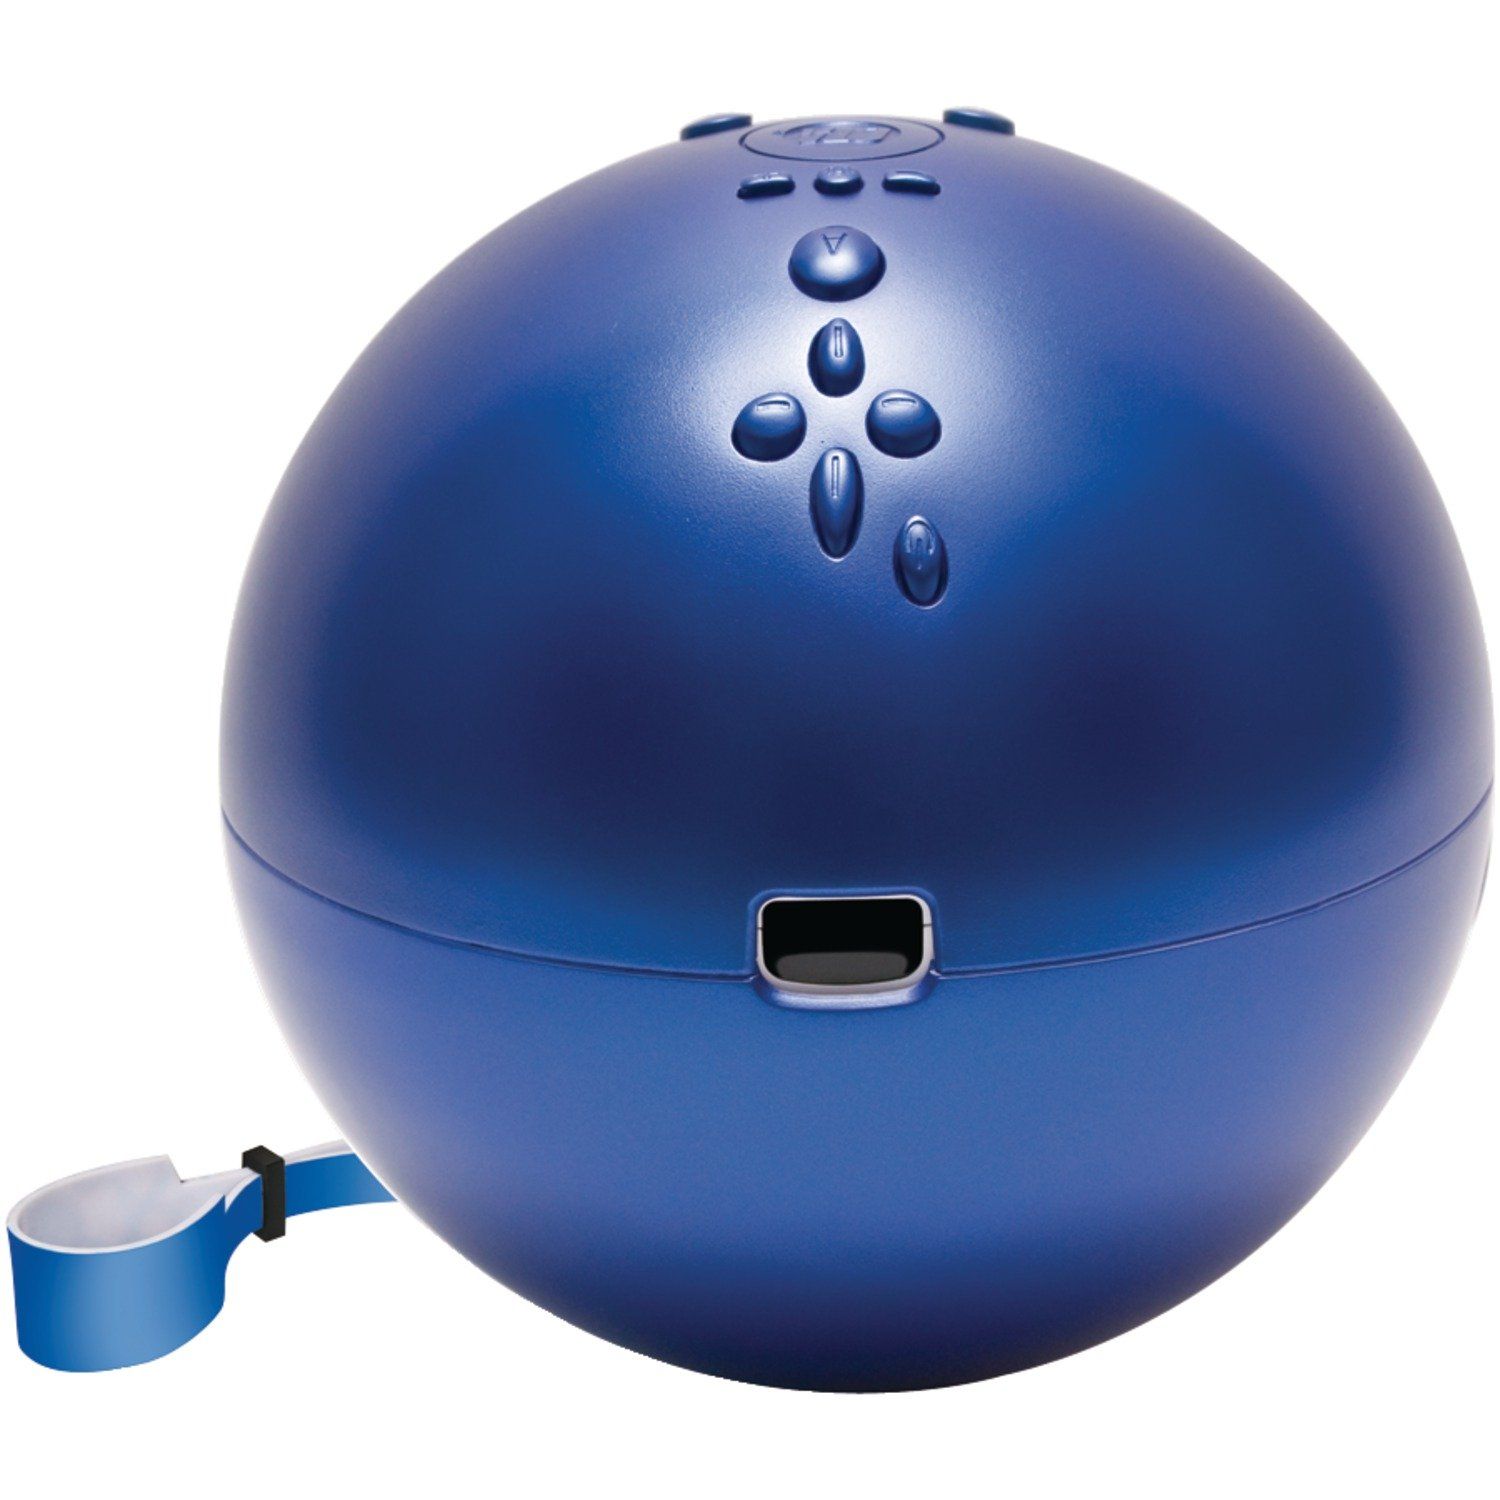 The Wii Bowling Ball.